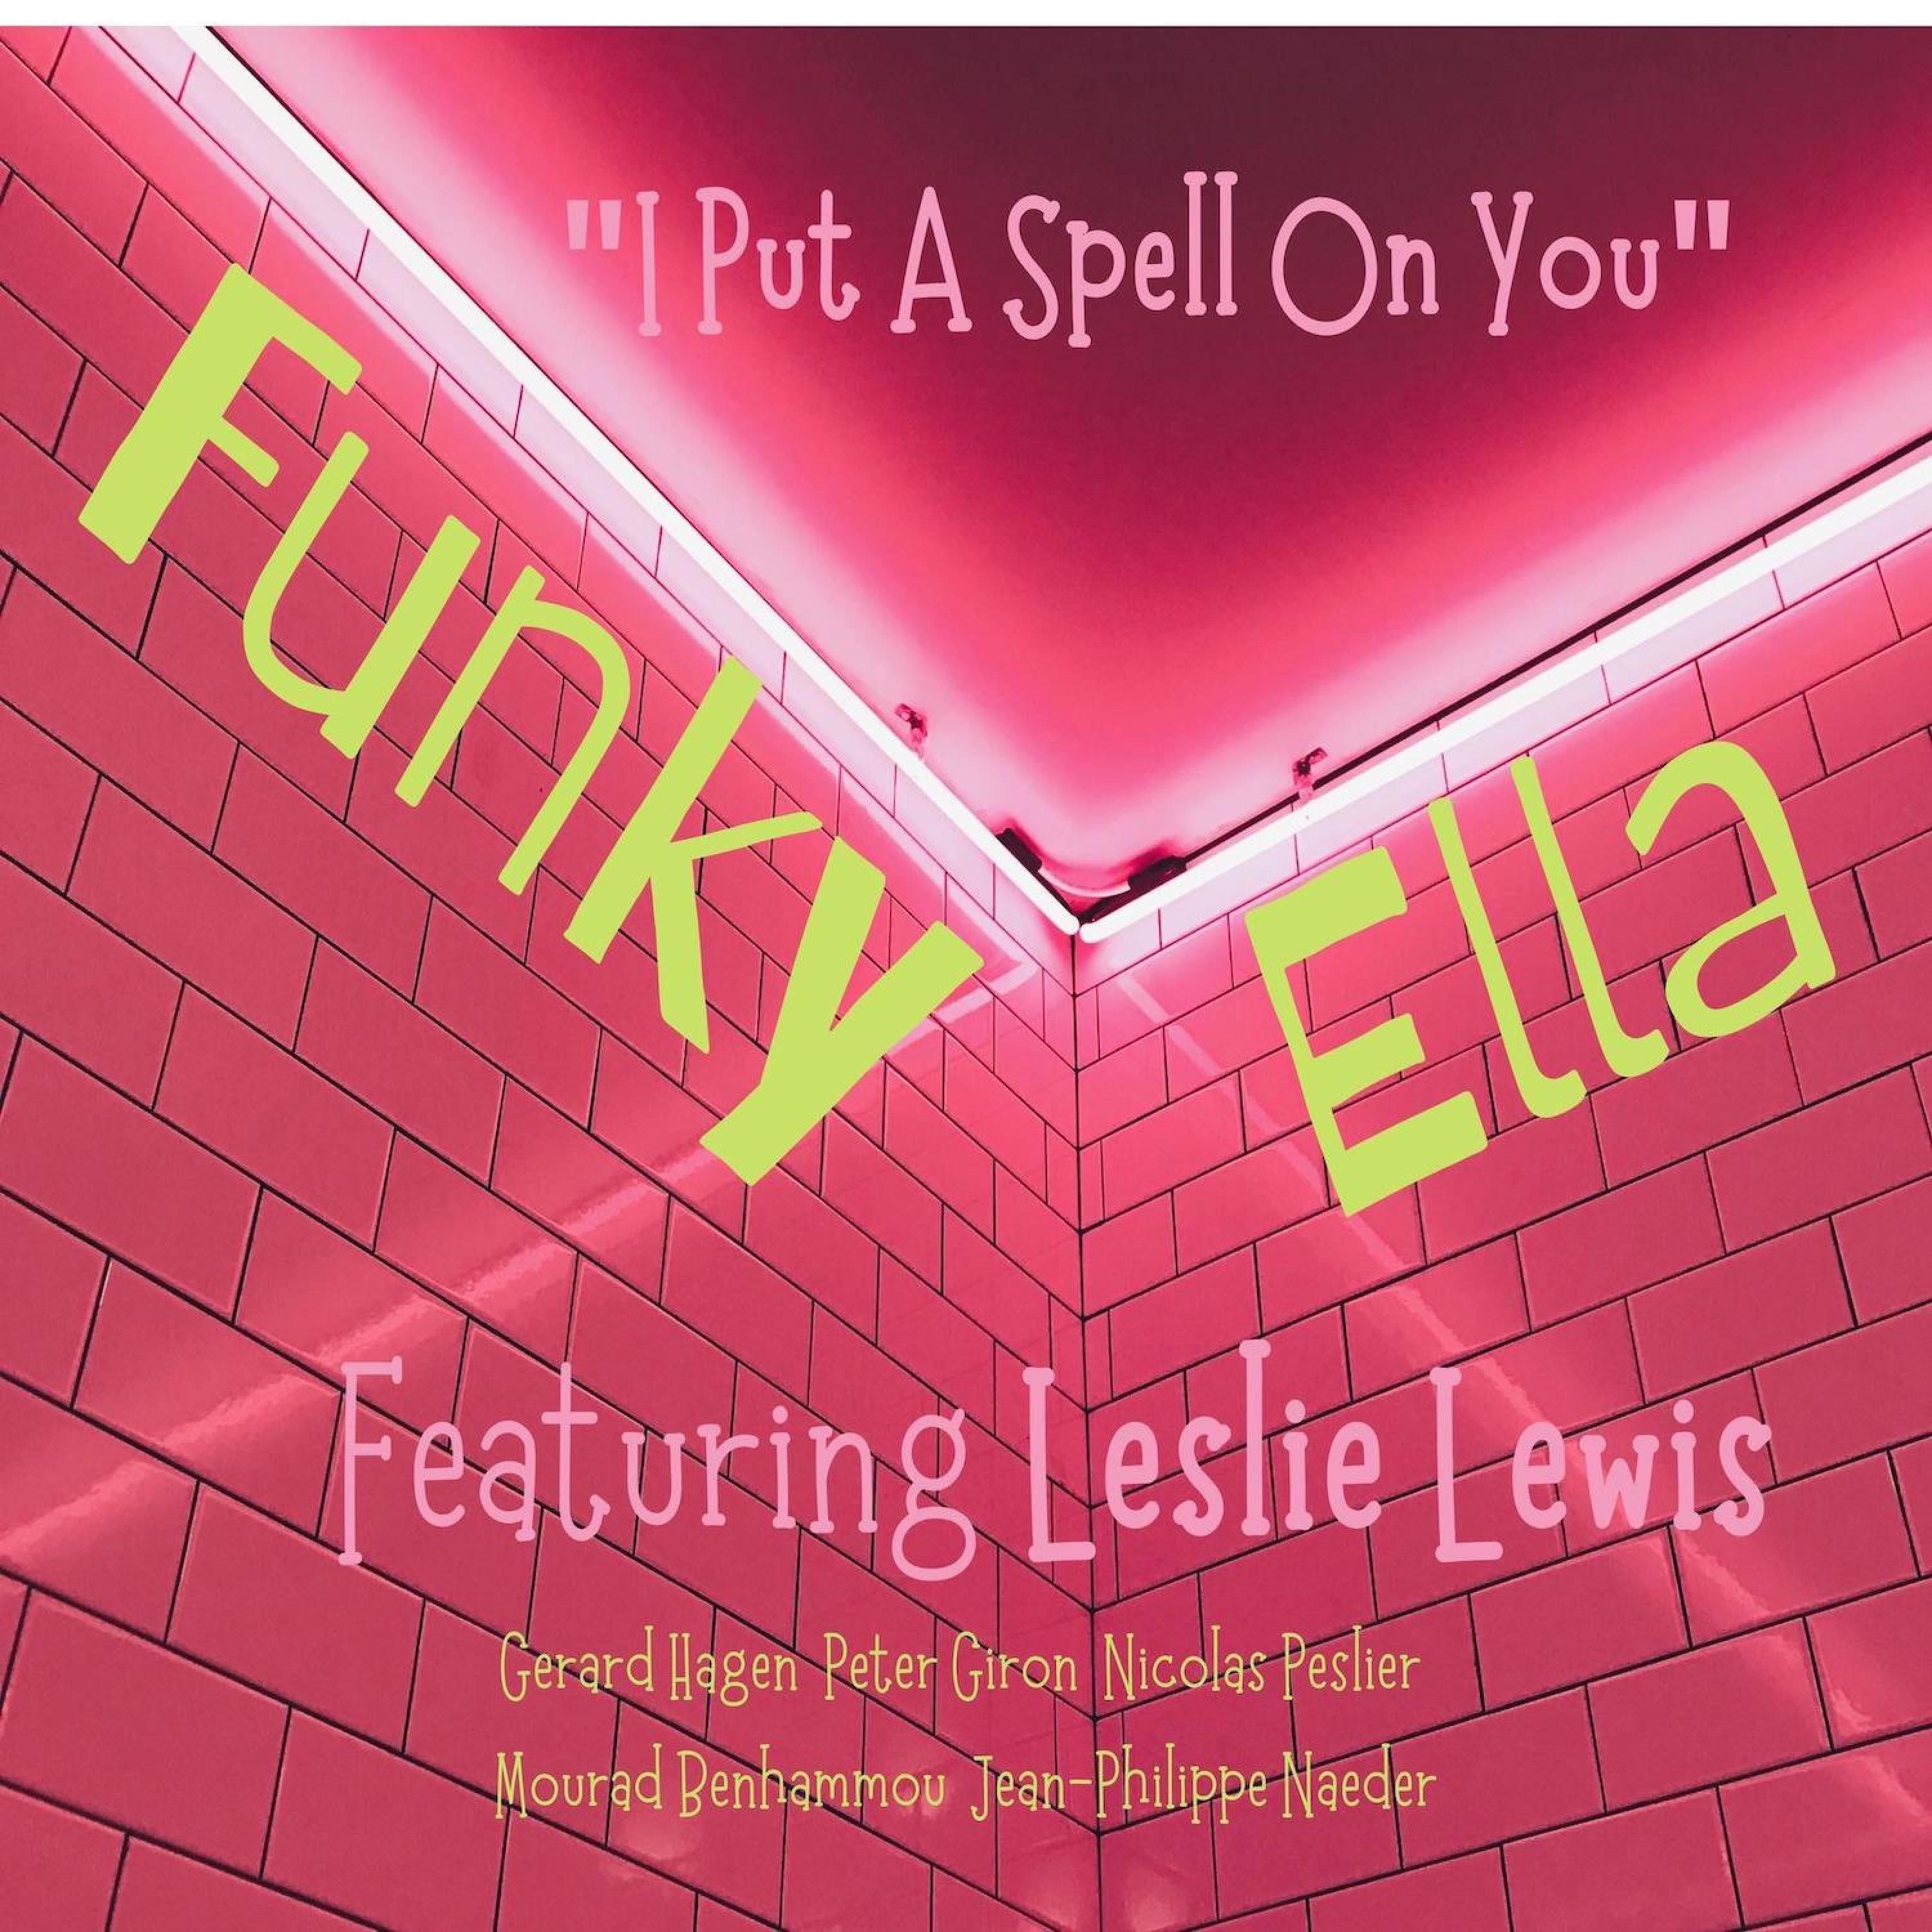 Funky Ella (feat. Leslie Lewis) – I Put A Spell On You (2021) [FLAC 24bit/96kHz]